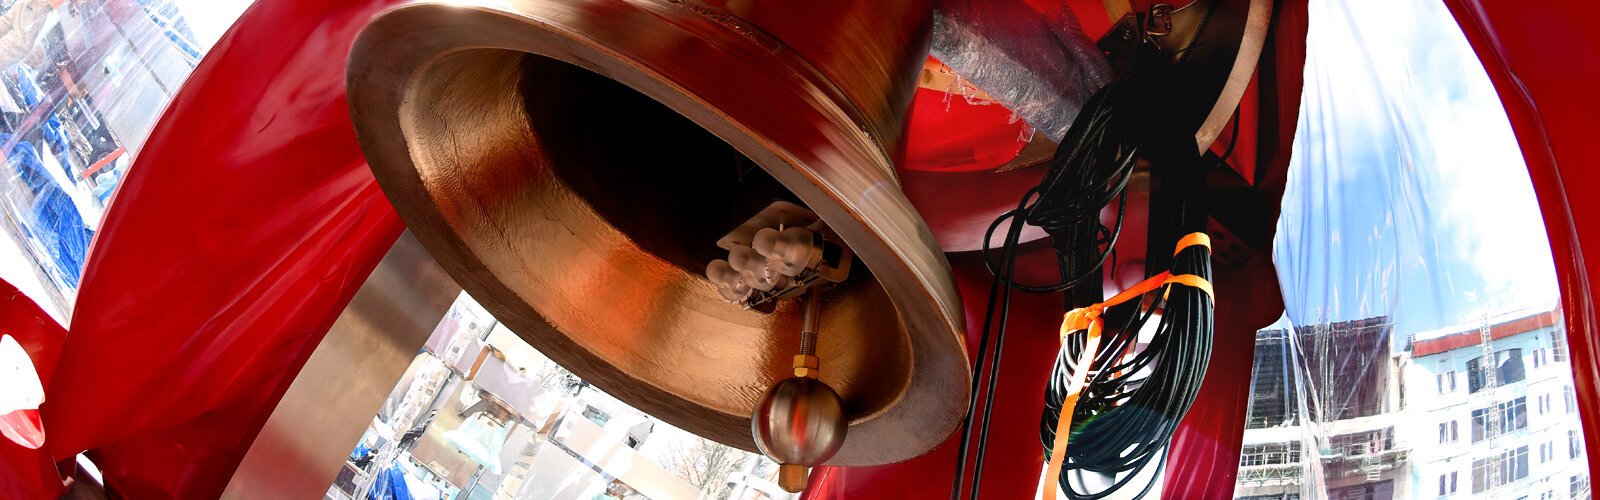 This hand-crafted bronze bell is one of 63 bells in the new Ars Sonora musical structure that will reflect the University of Tampa’s mission and values. Ars Sonora means Art of Sound in Latin; a registered trademark of Paccard Bell Foundry in France.